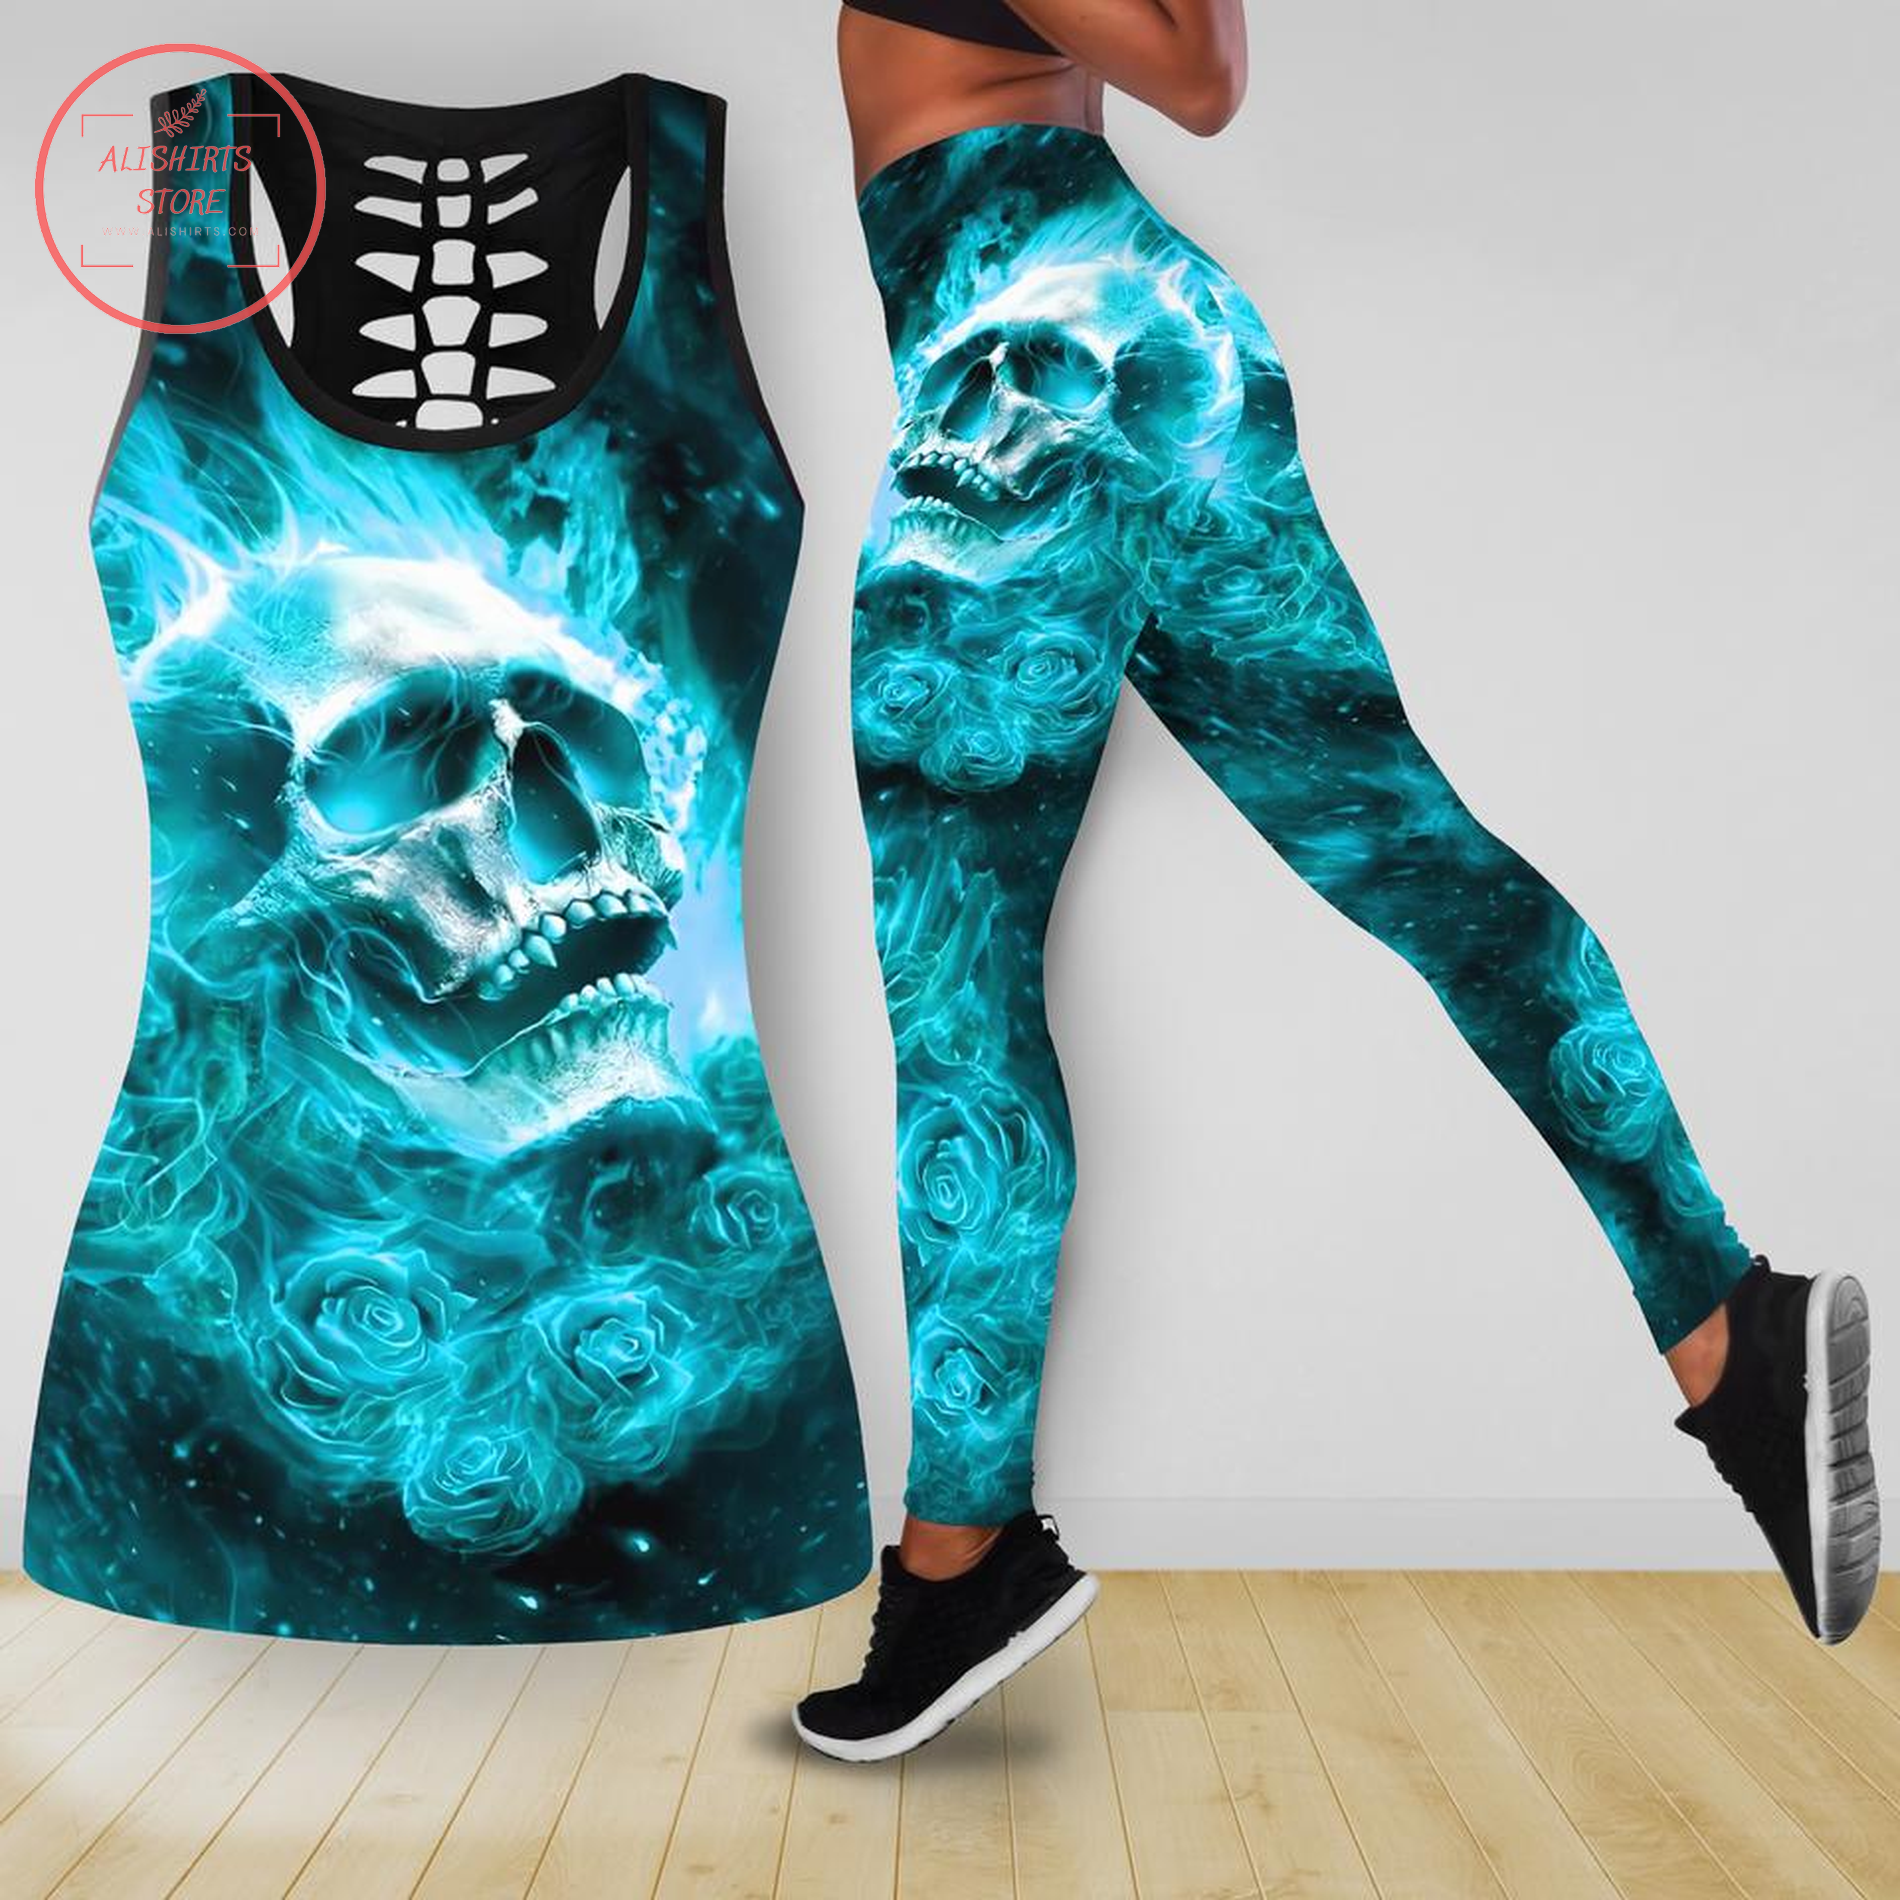 Blue Tank top & leggings with skulls and roses